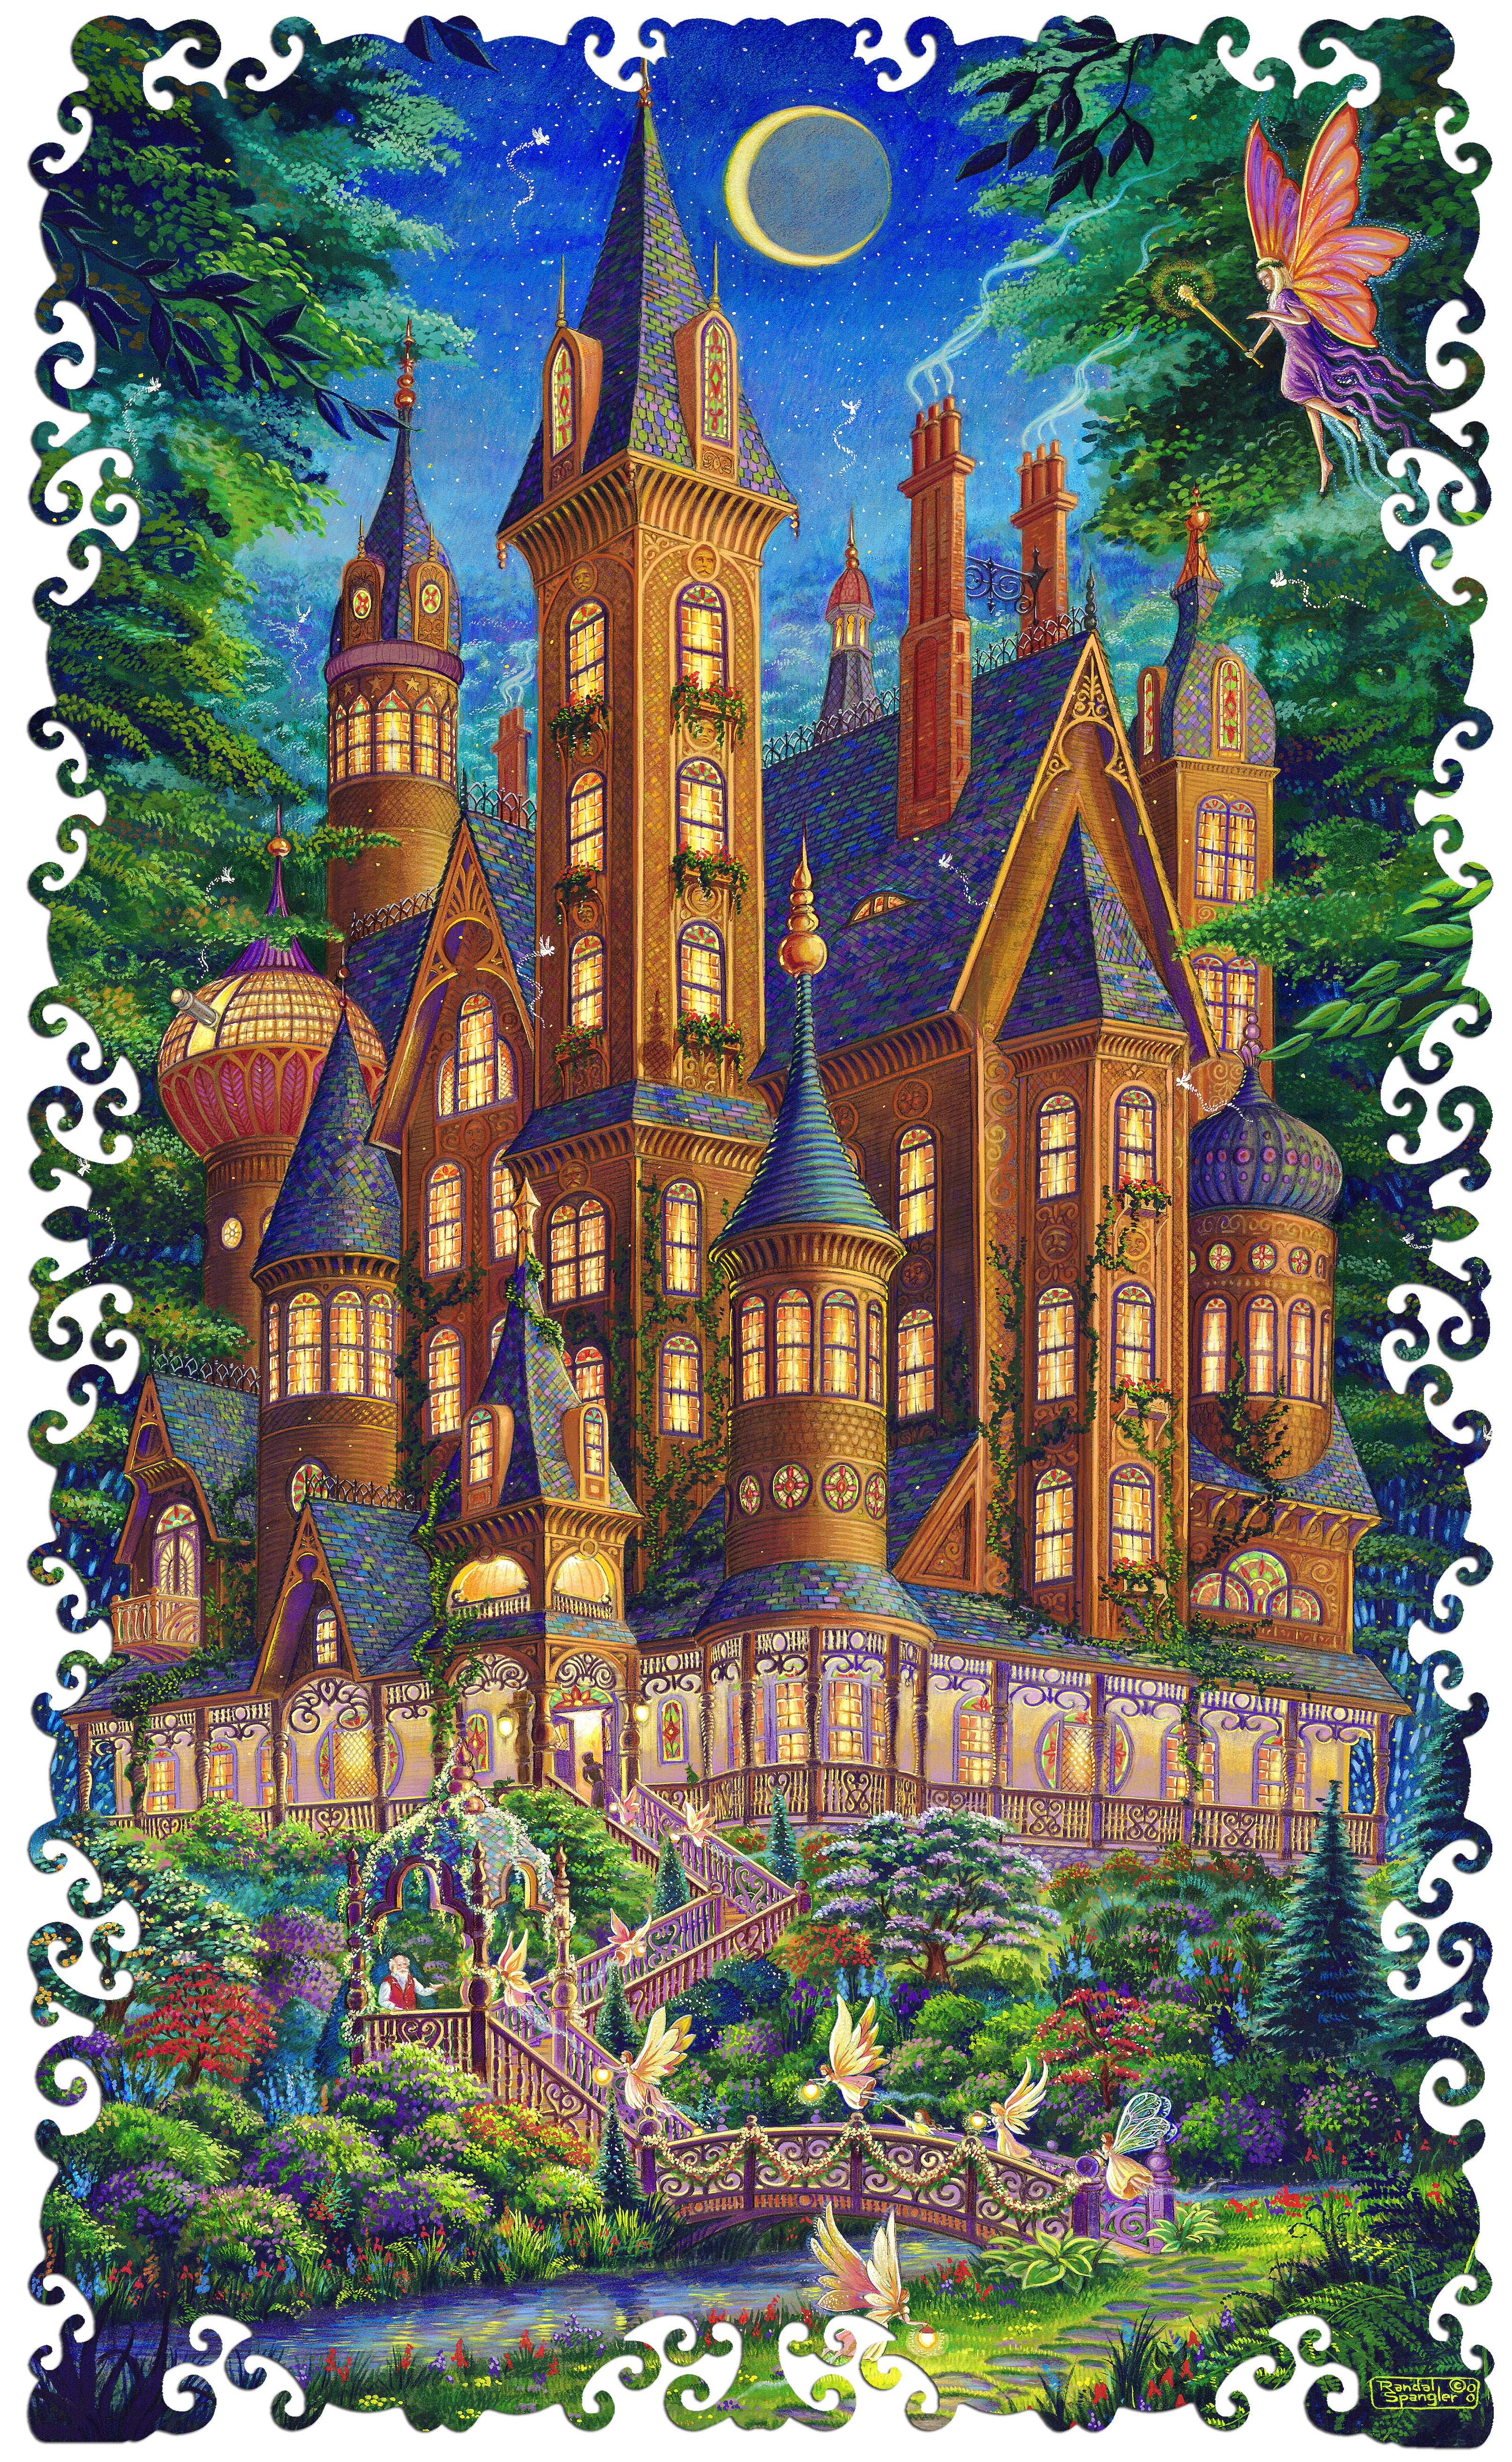 Artifact Puzzles - Randal Spangler Some Enchanted Evening Wooden Jigsaw Puzzle